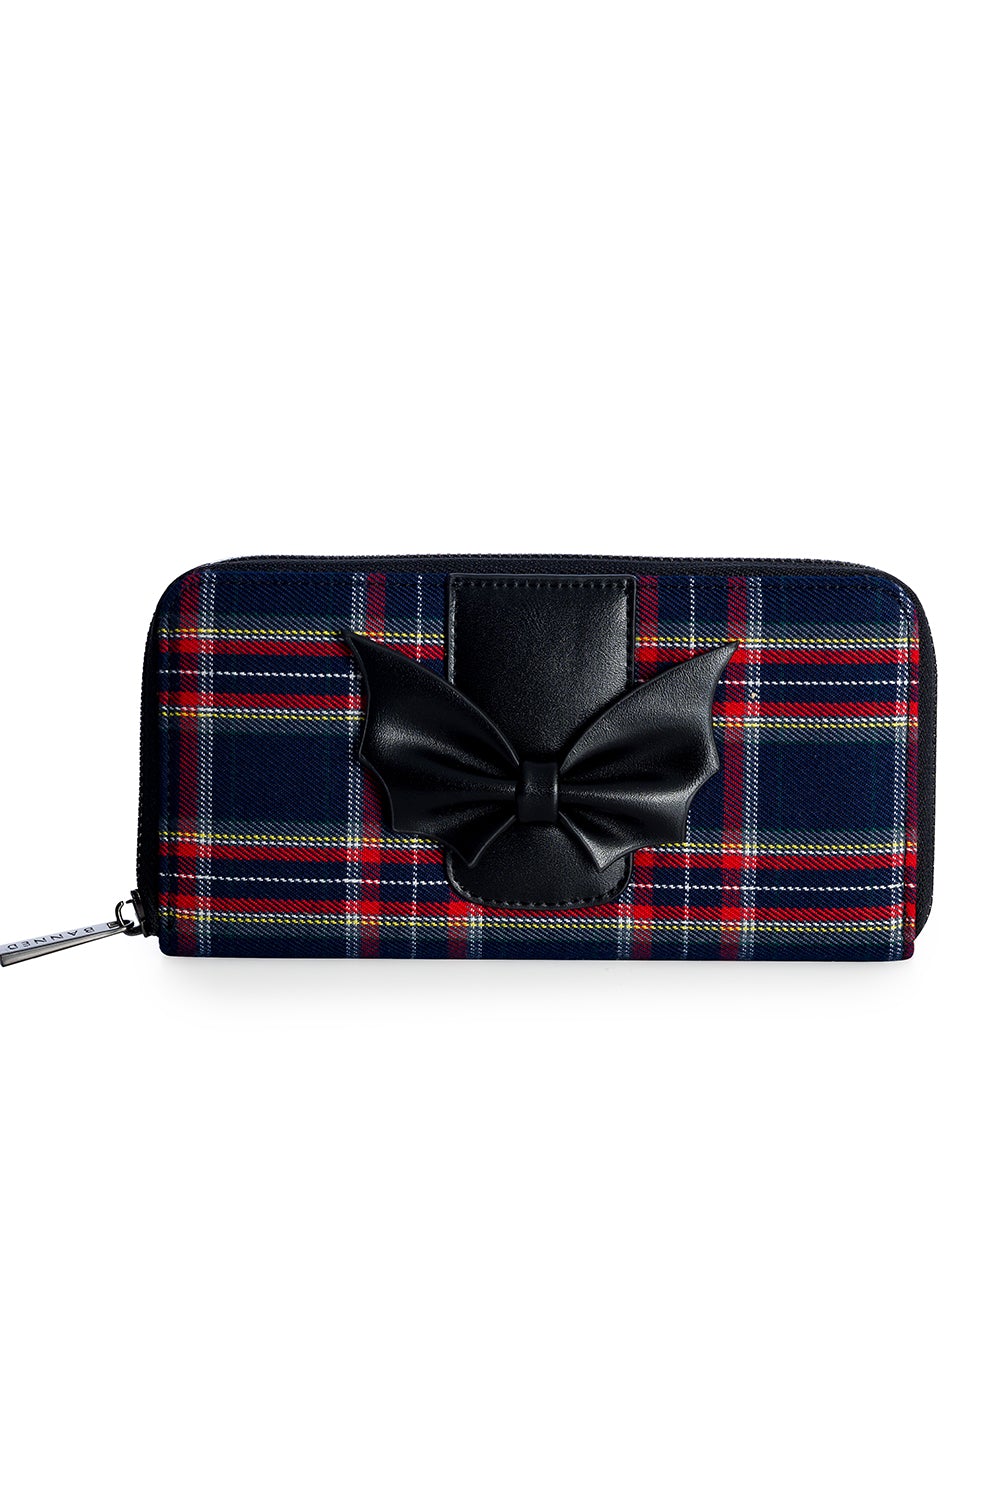 Navy tartan print purse with bat styled bow detail on the front. 